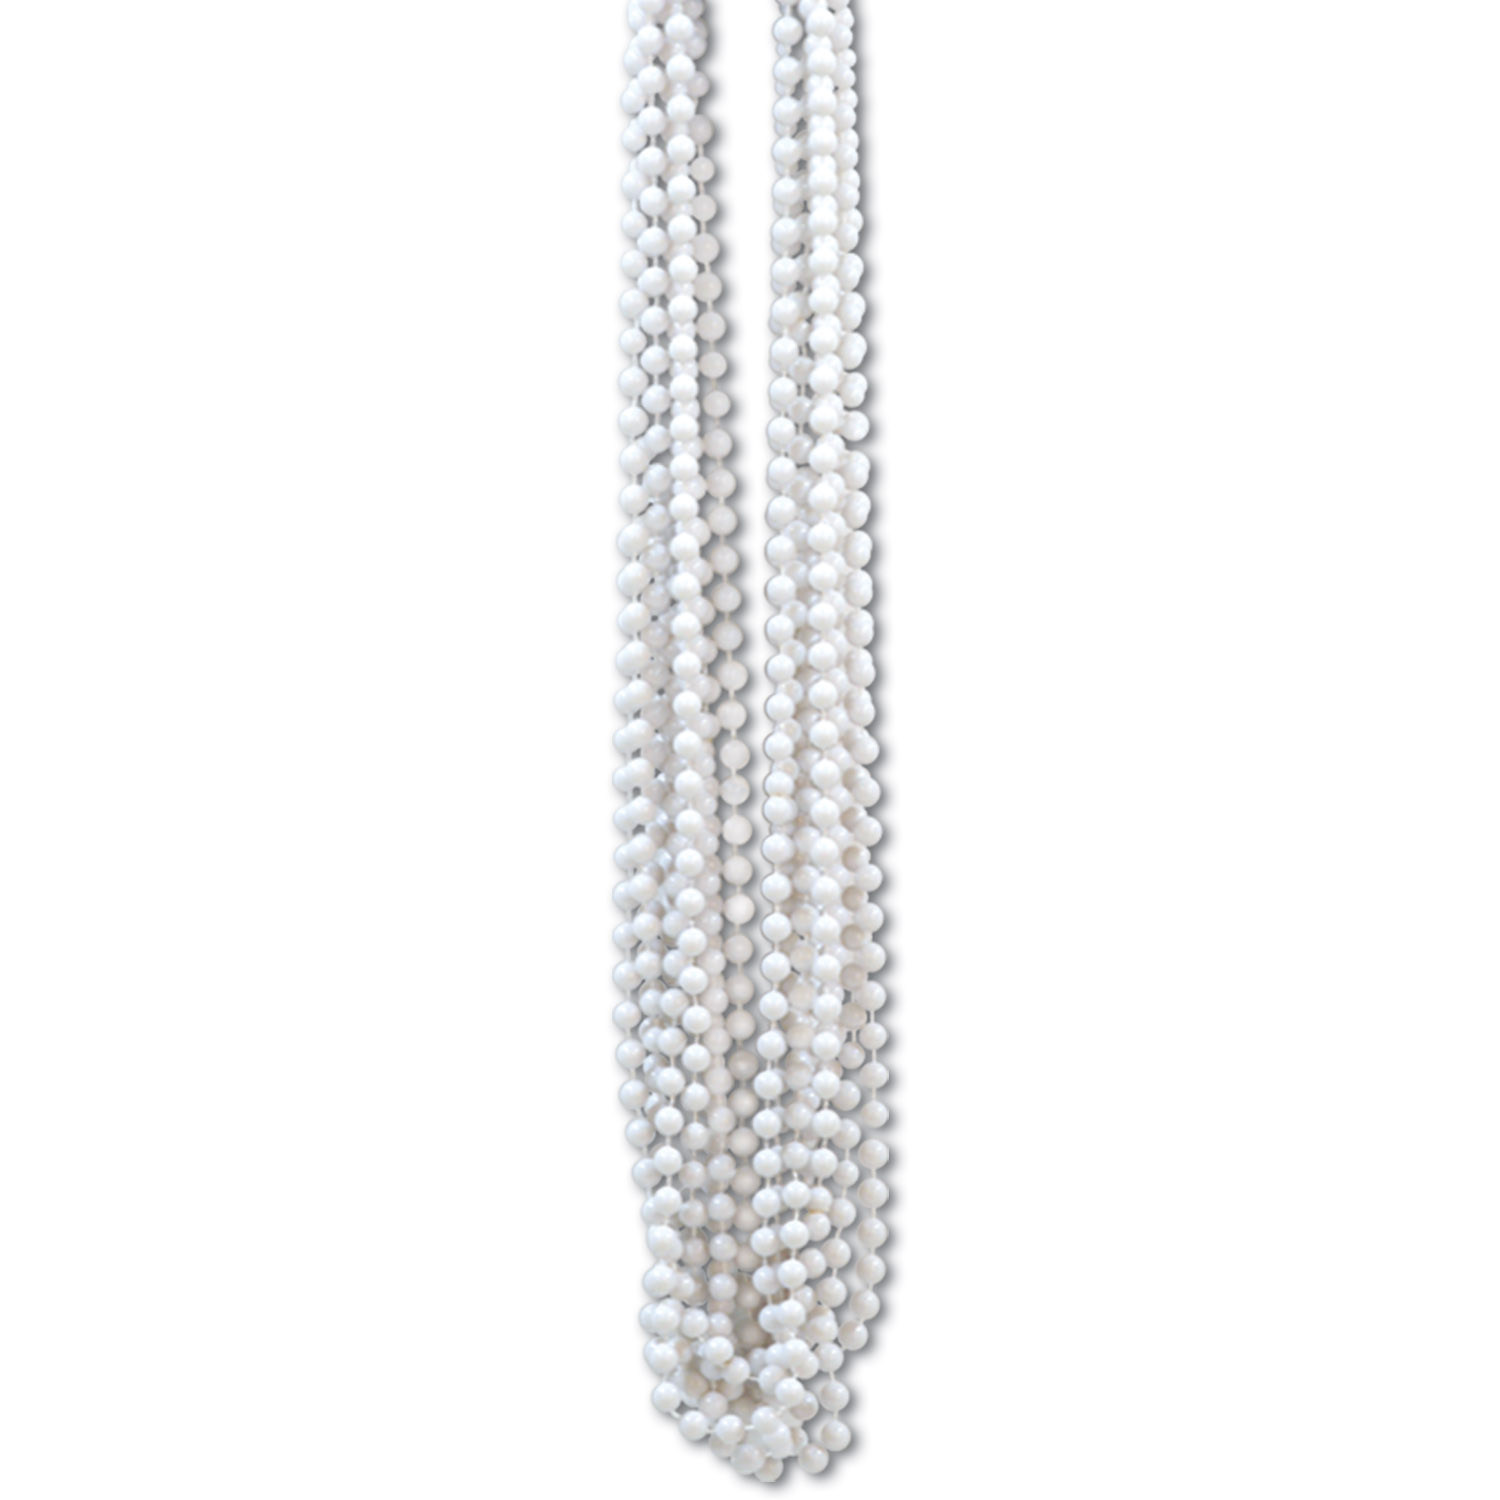 Stainless Steel Ball Bead Chain Necklace Chj4070 | Wholesale Jewelry Website